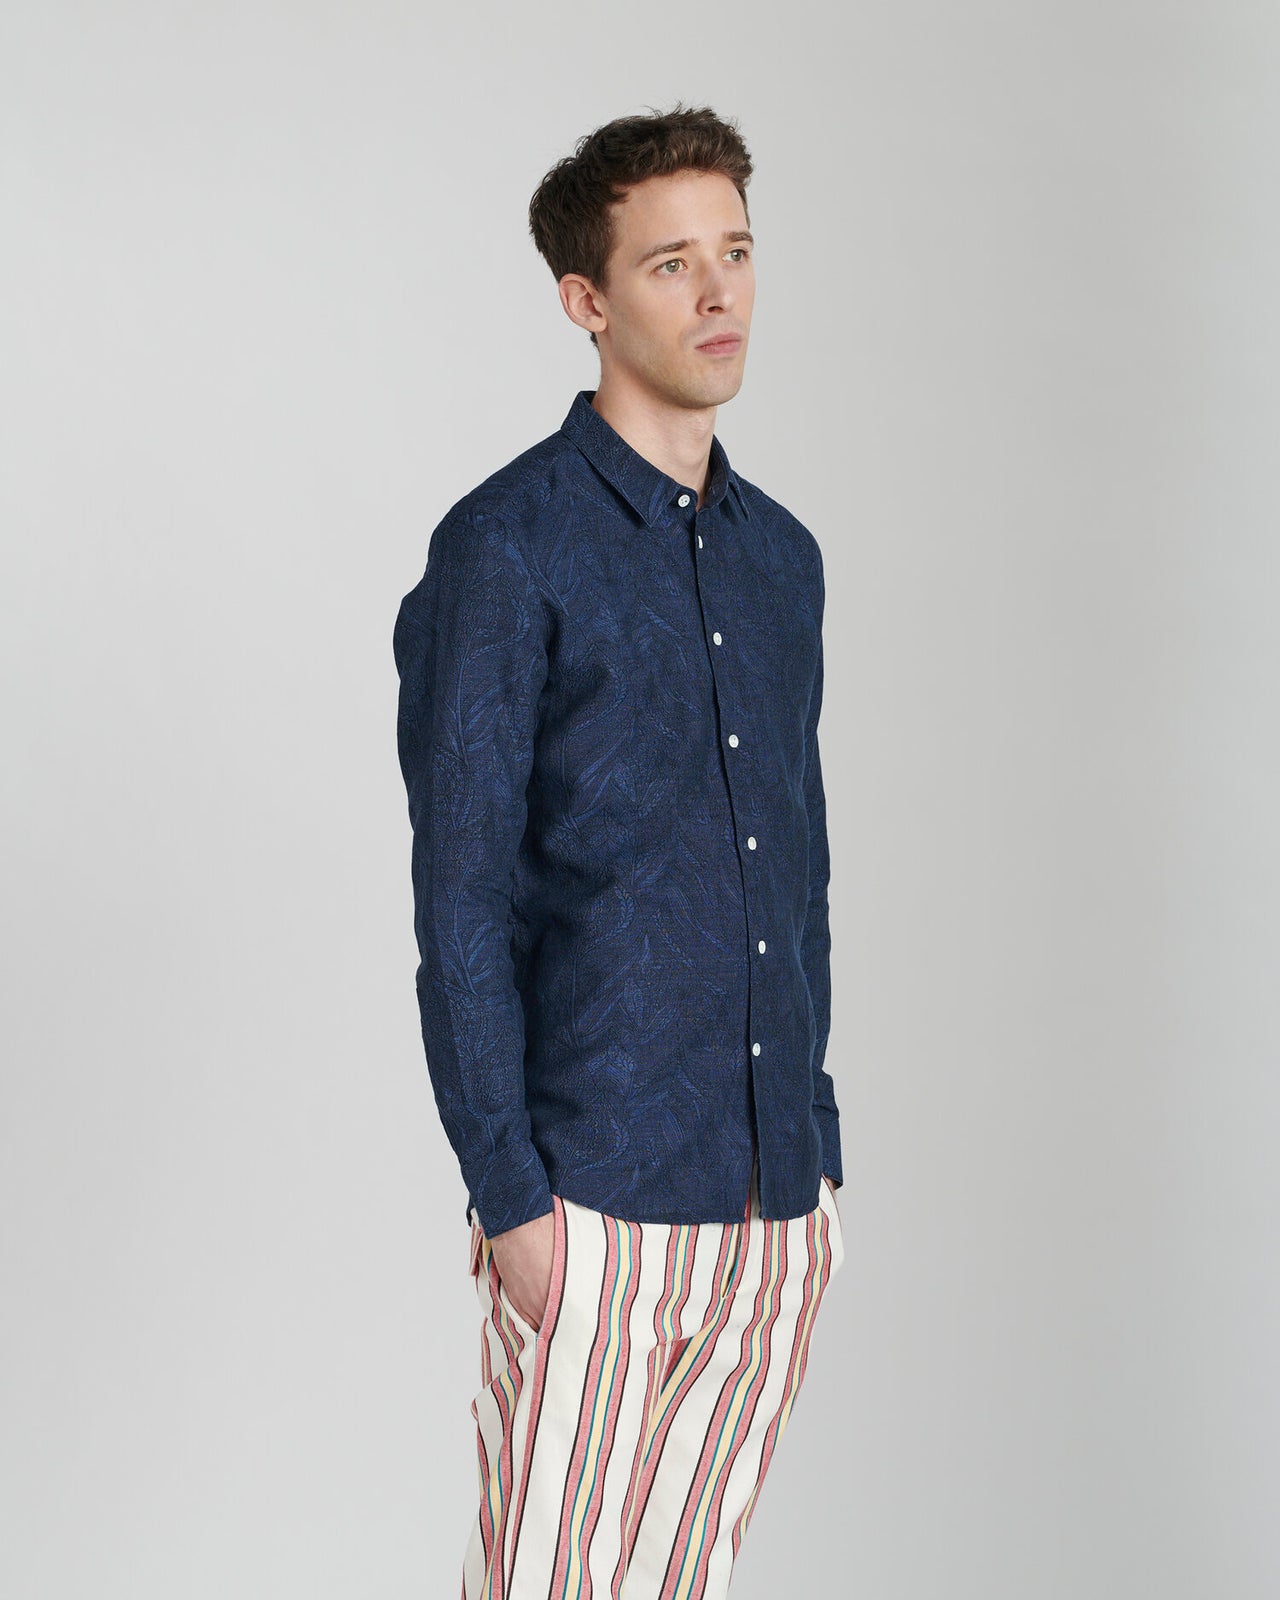 Feel Good Shirt in a Navy Blue Subtle Flower Jacquard Woven Italian Cotton and Linen